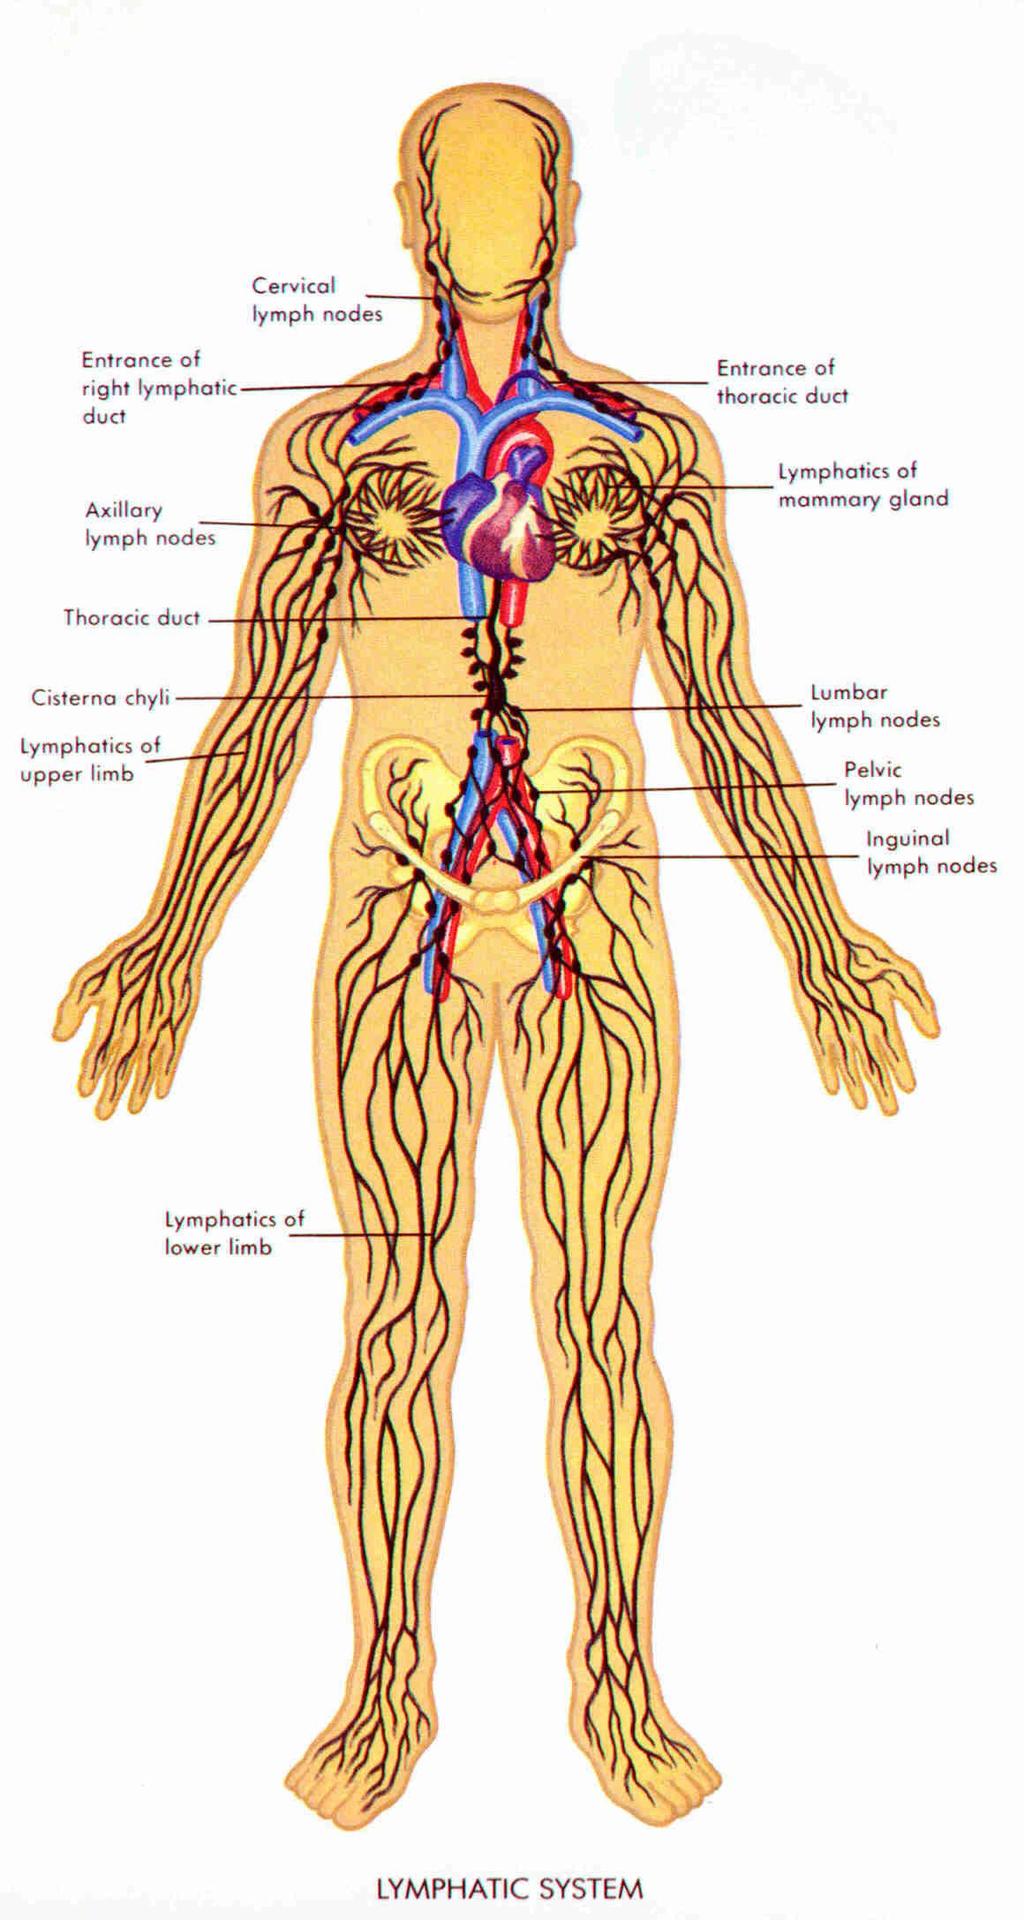 Lymphatic System Defends against disease keep fluid levels in balance Made of lymphatic vessels that